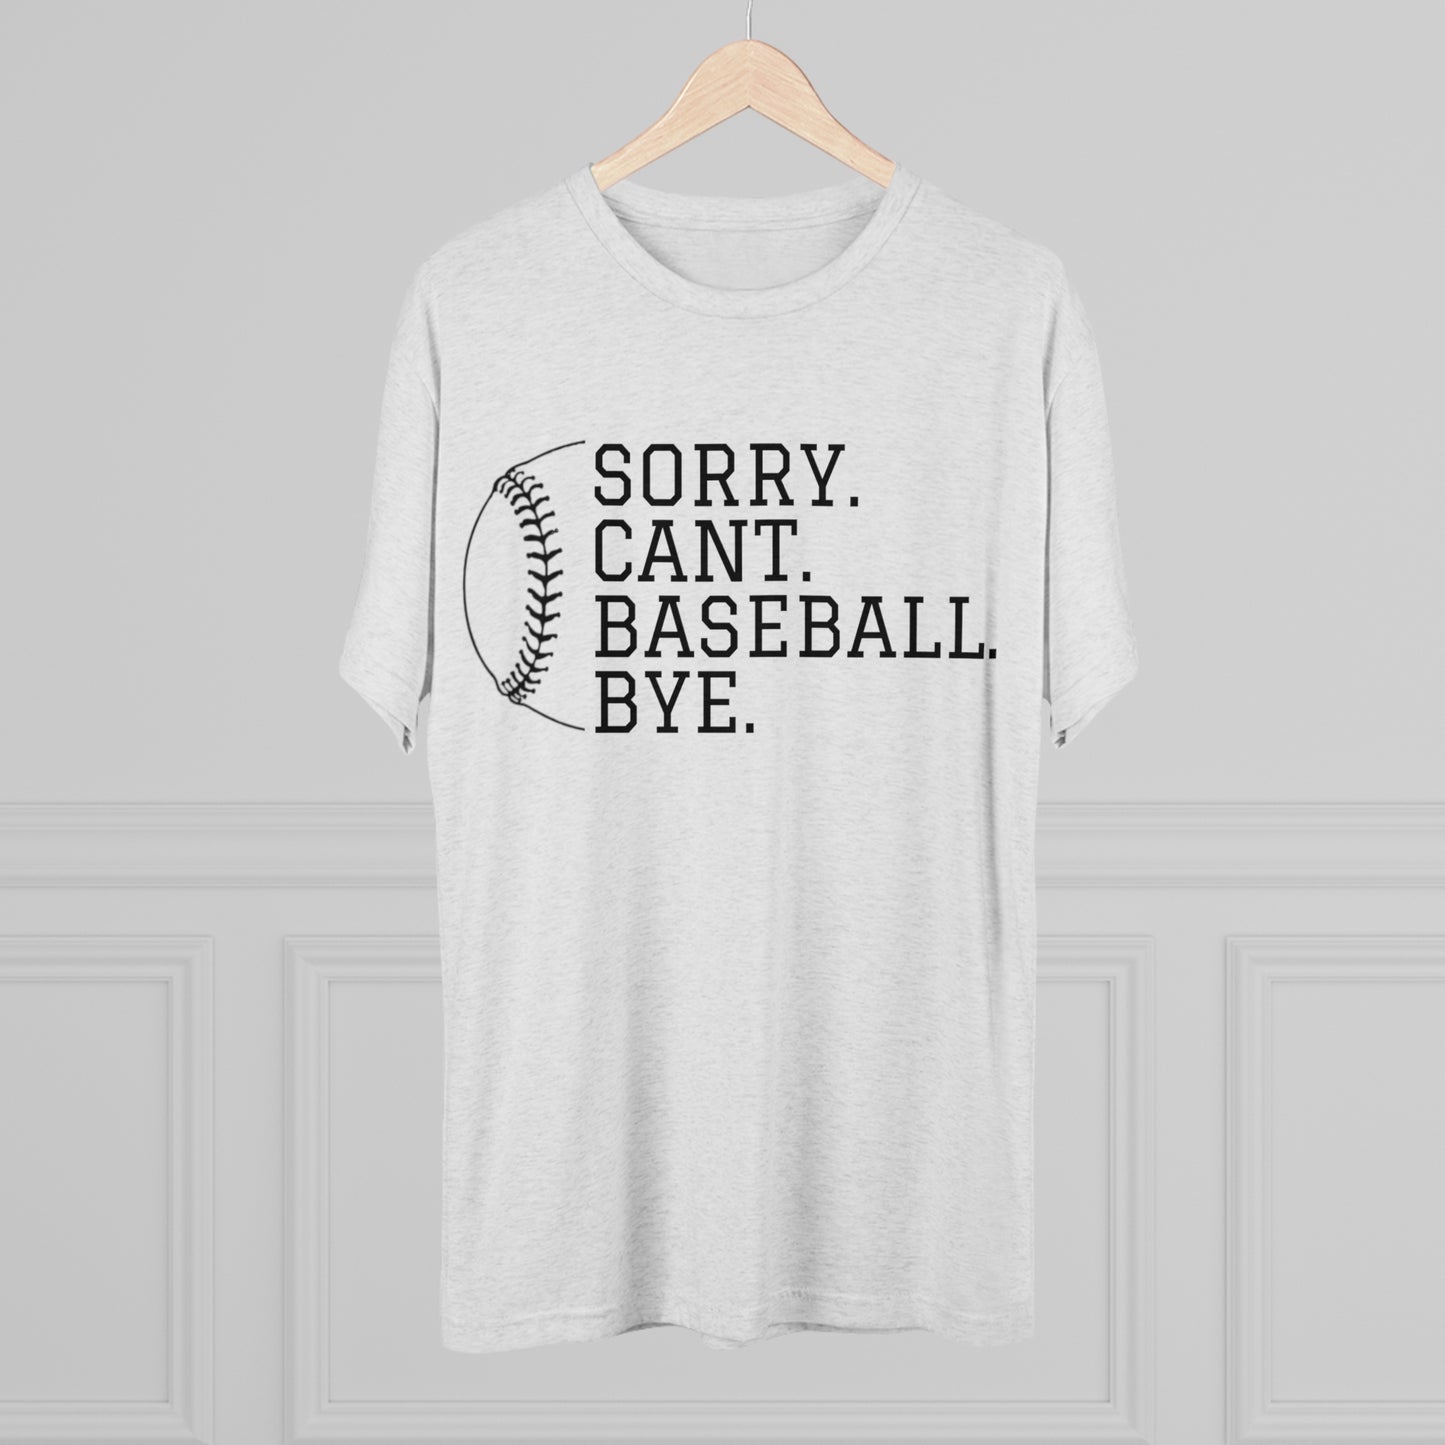 Sorry. Cant. Baseball. Bye.  Tri-Blend Tee: Unbelievably Soft Comfort with a Stylish Edge - Perfect for Baseball Enthusiasts!